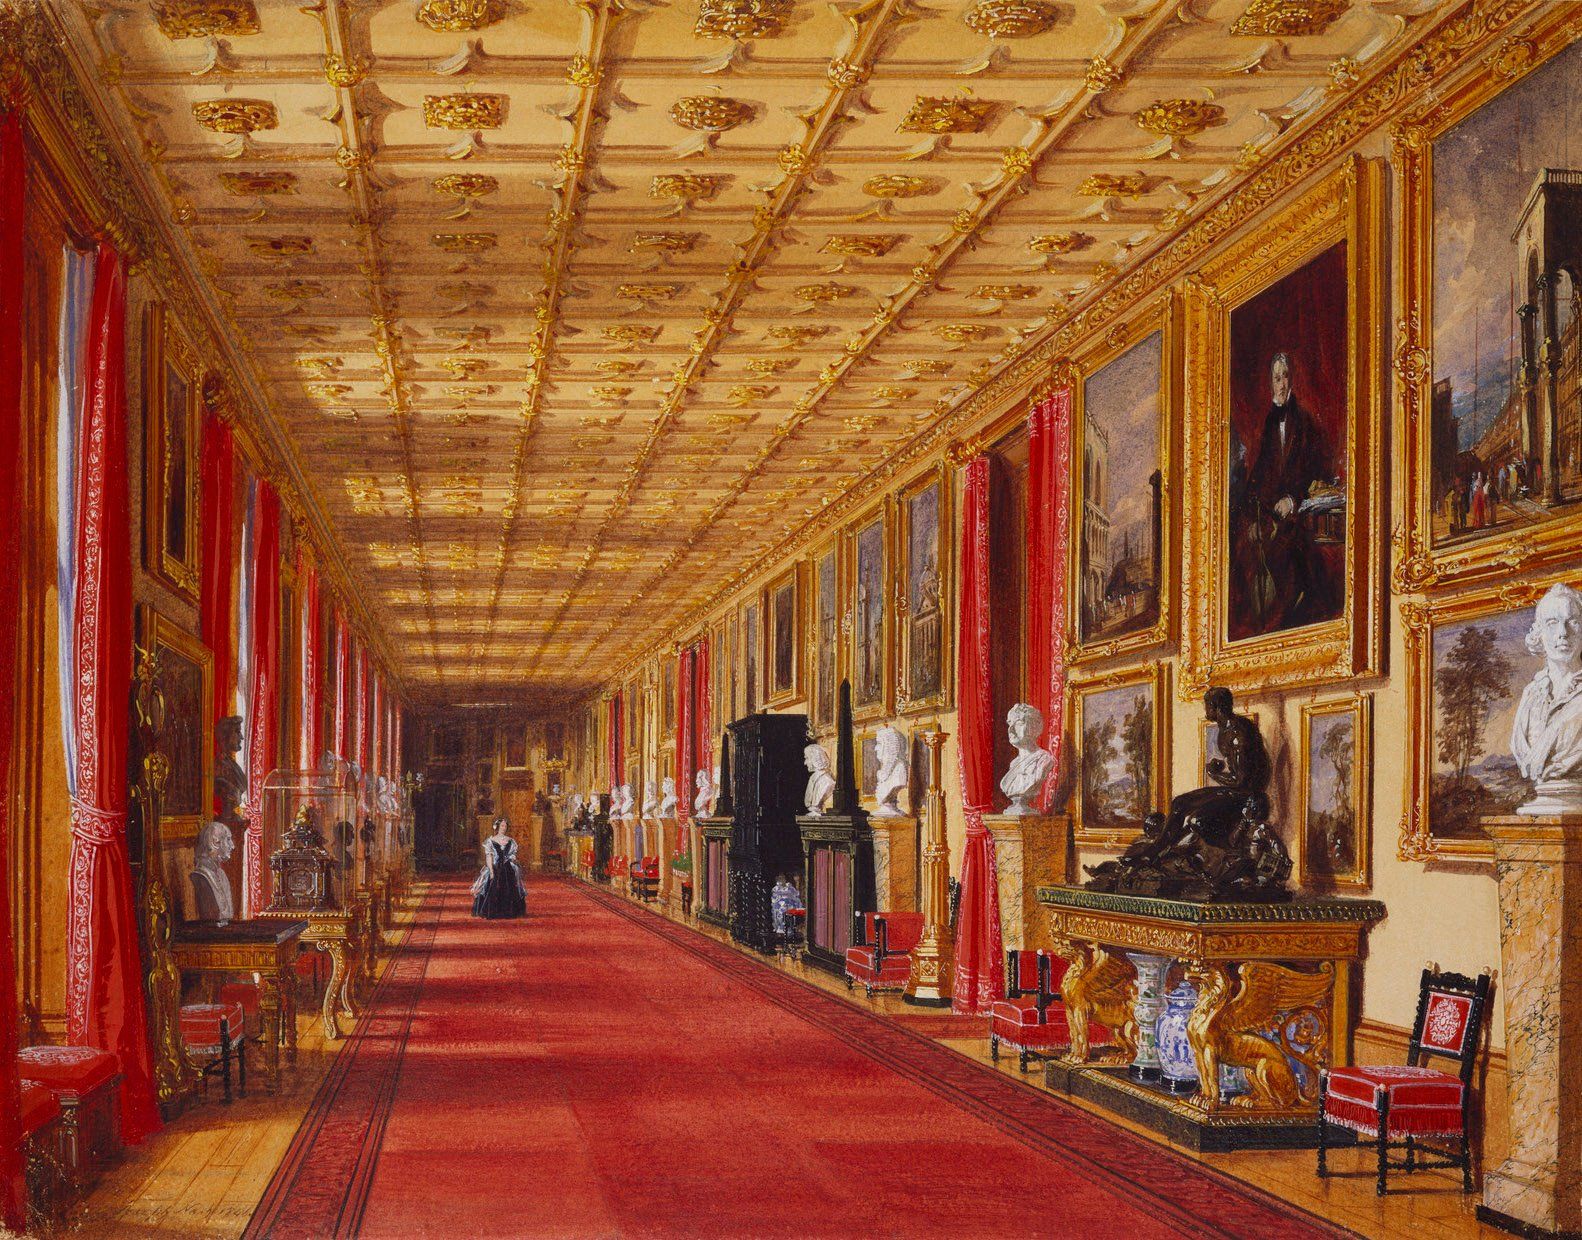 A watercolor view of part of the Grand Corridor at Windsor Castle; a figure, perhaps representing the Queen, approaches. Signed and dated at bottom left: Joseph Nash 1846. The ceiling is coffered gold, the right wall is covered in paintings and sculptures, the left wall is open full-length windows with red drapes that match the red carpet and red-upholstered chairs.